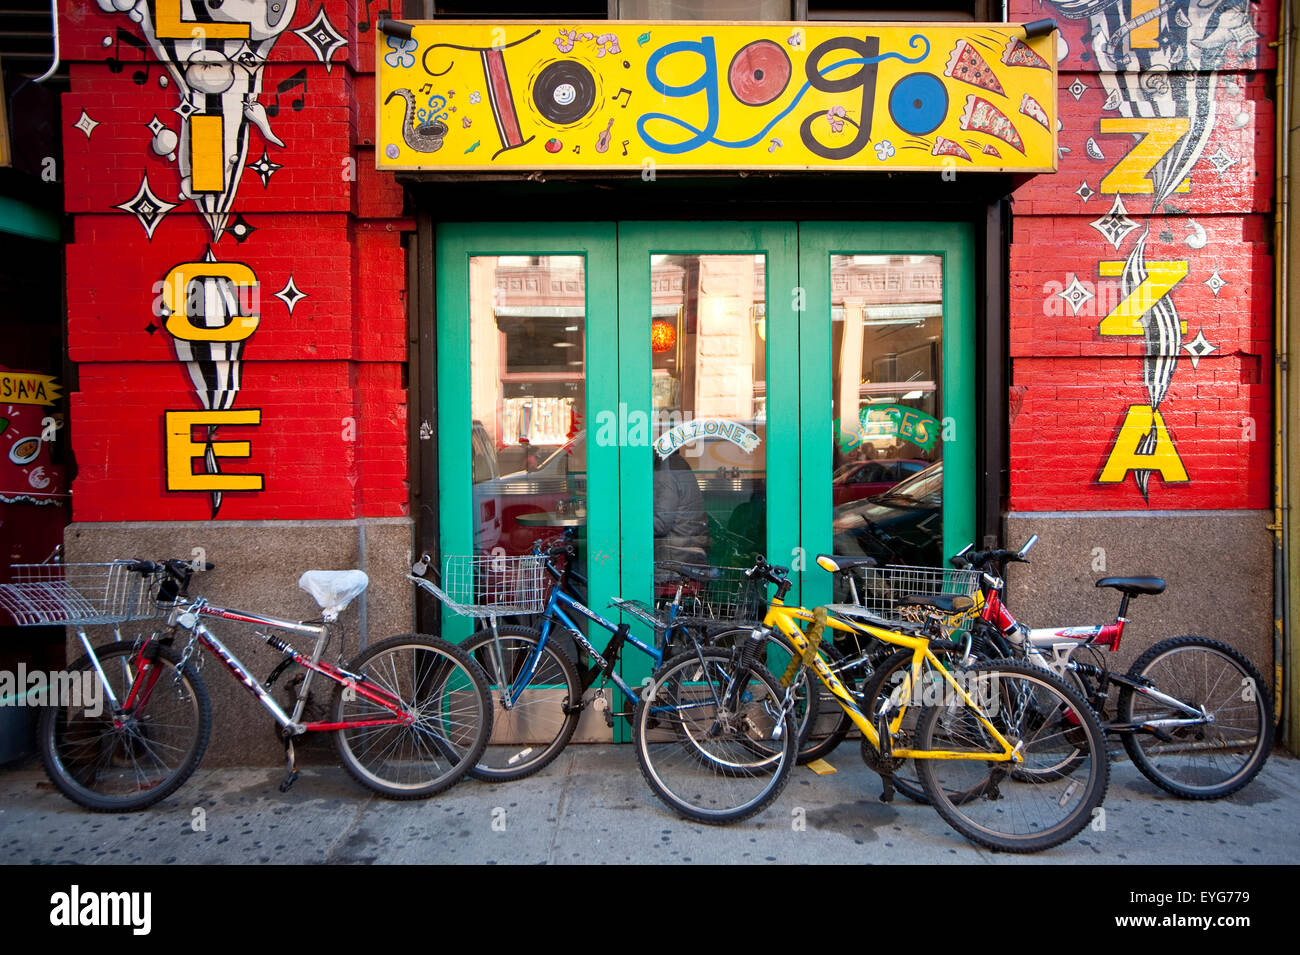 Bicycles Outside A Pizzeria In The West Village, Manhattan, New York, Usa Stock Photo